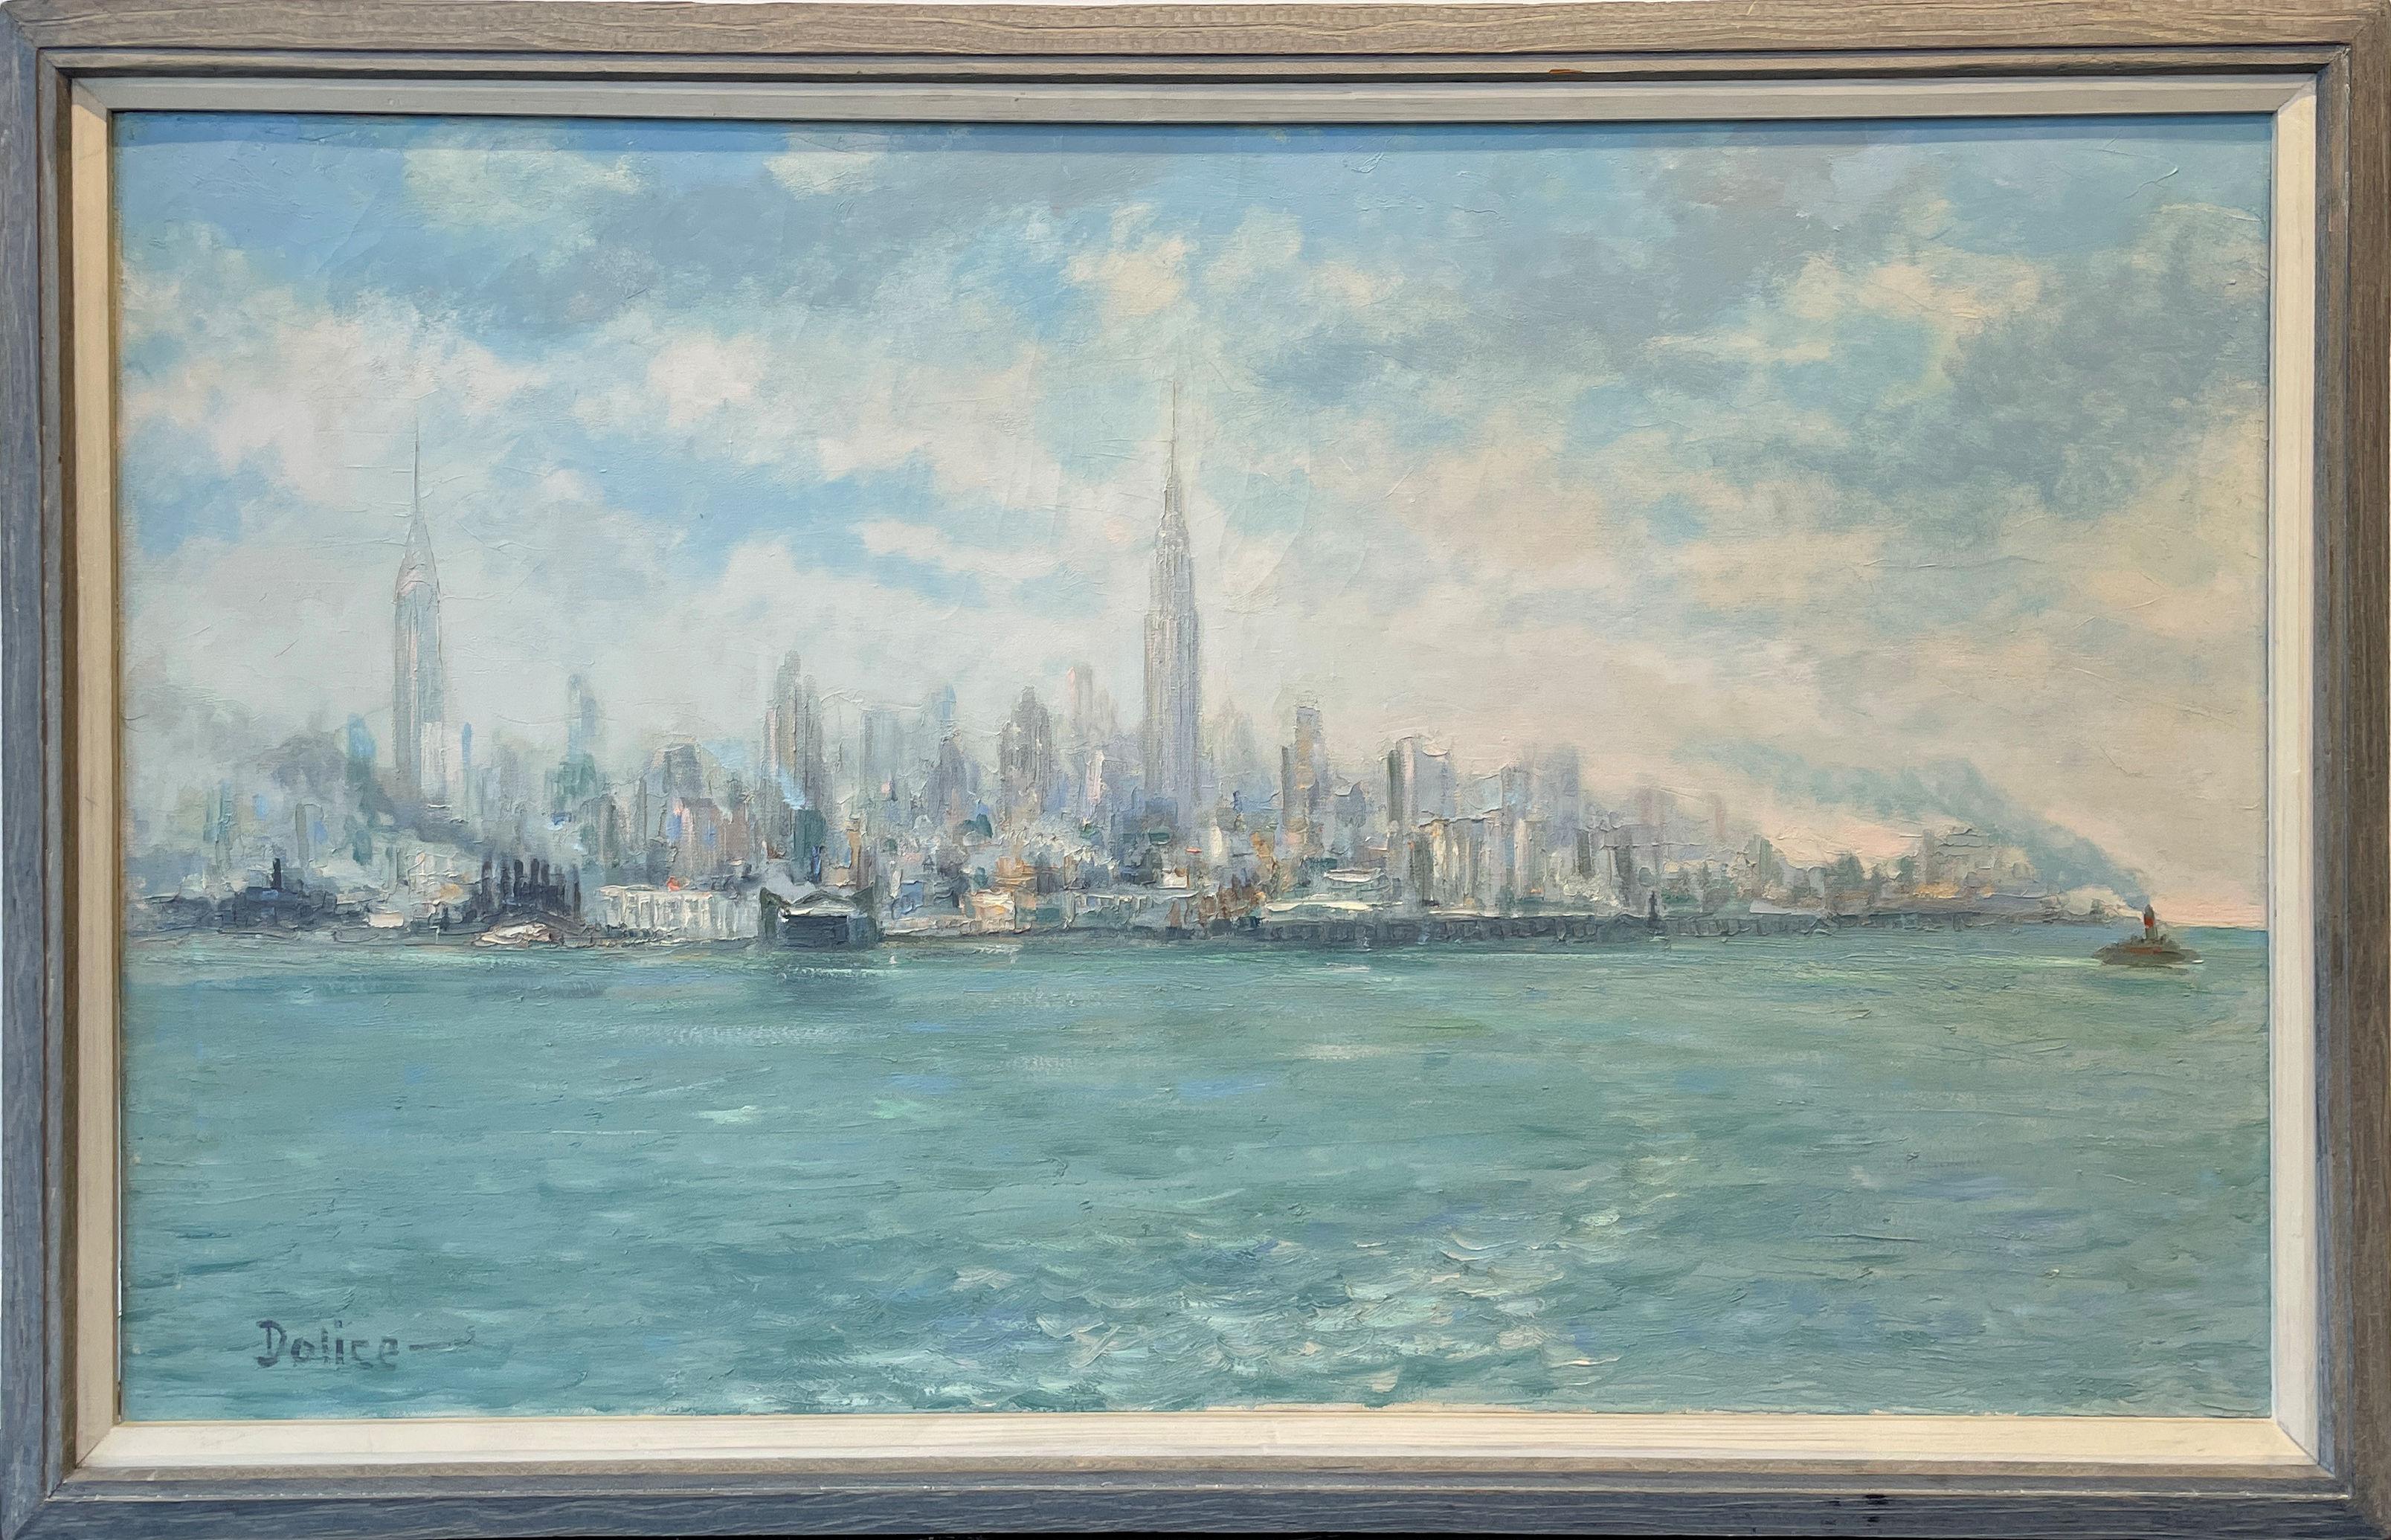 Leon Dolice
View from New York Harbor, circa 1960
Signed lower left
Oil on canvas
26 x 44 inches

Provenance:
Private Collection, Boston
Private Collection, Worcester, Massachusetts

Leon Dolice was one of the masters of the New York City street